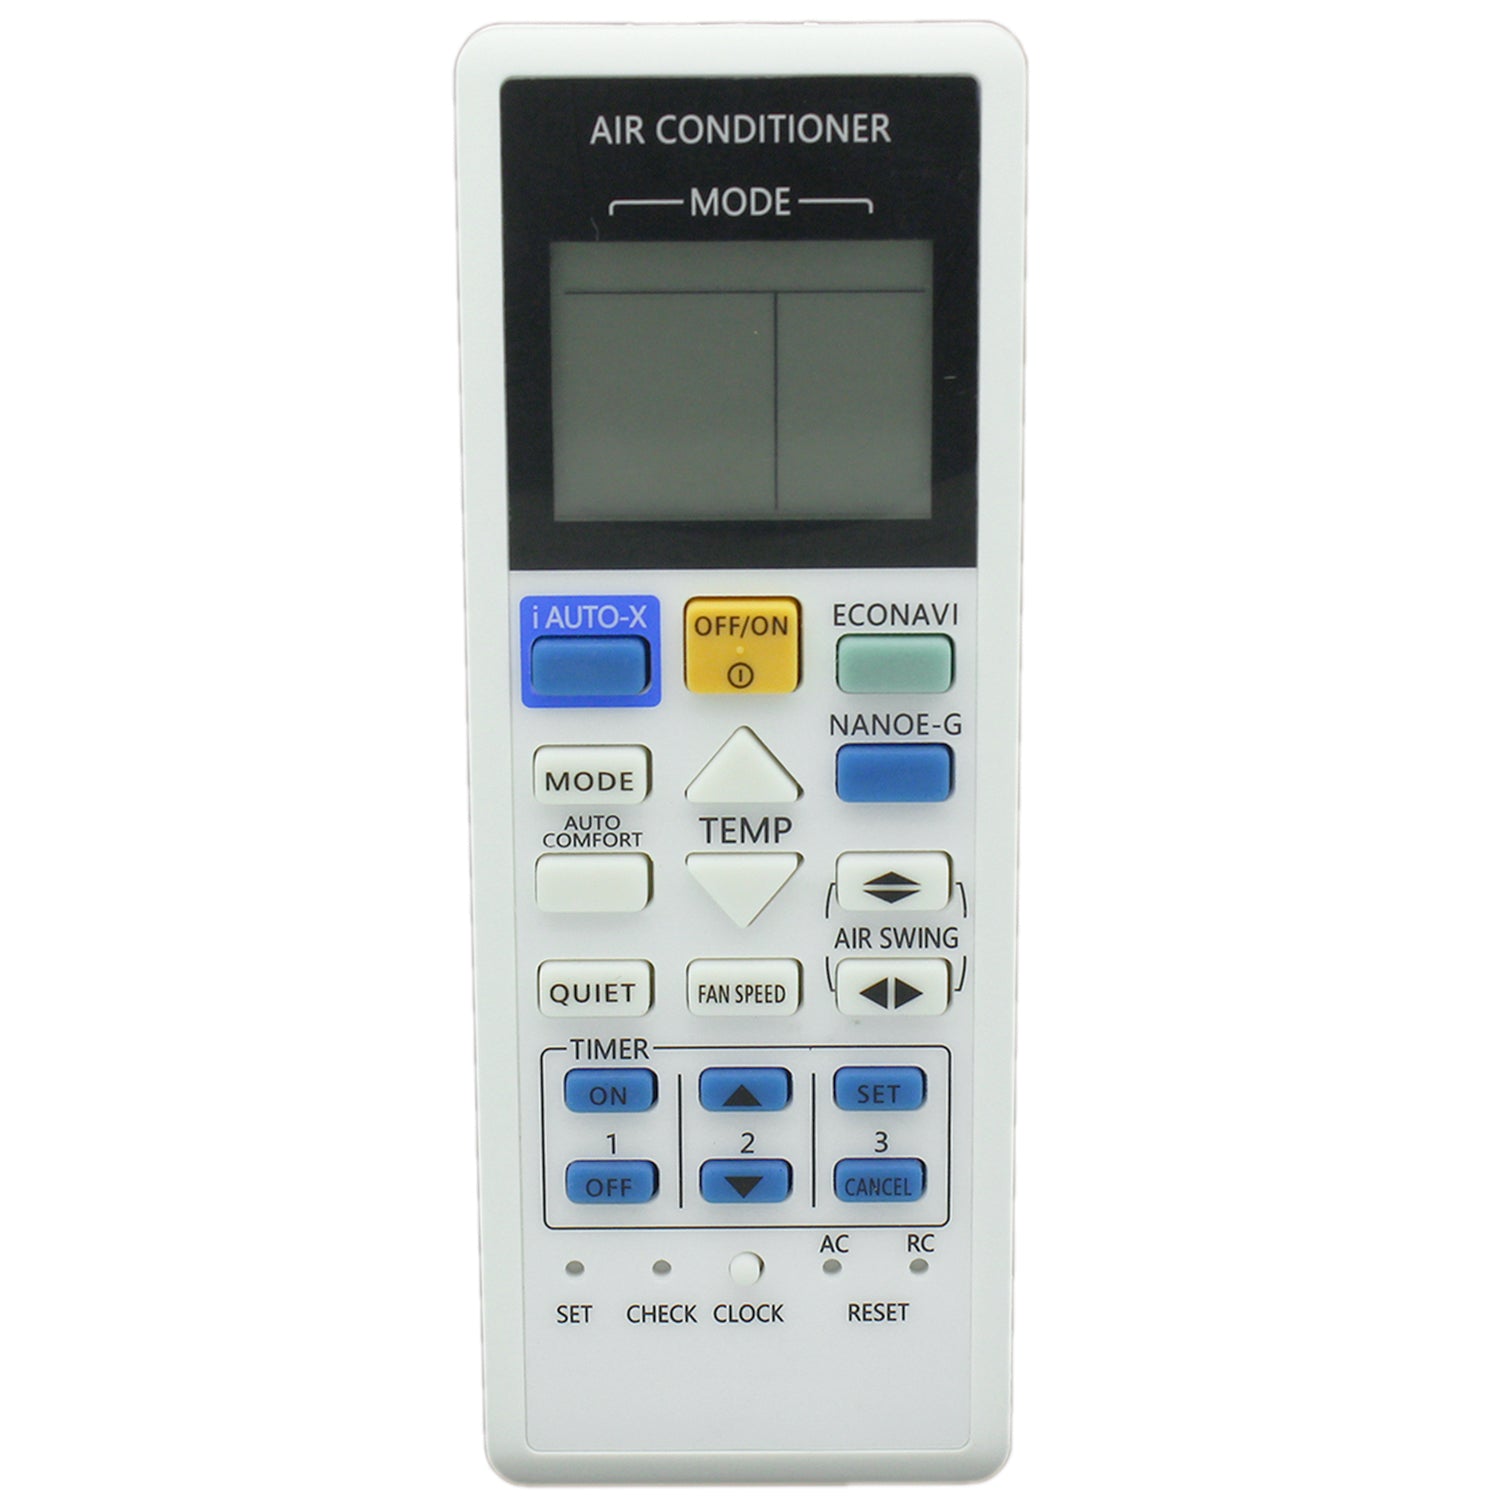 CS-E7NKR CS-E9NKR Remote Control Replacement for Panasonic Air Conditioner